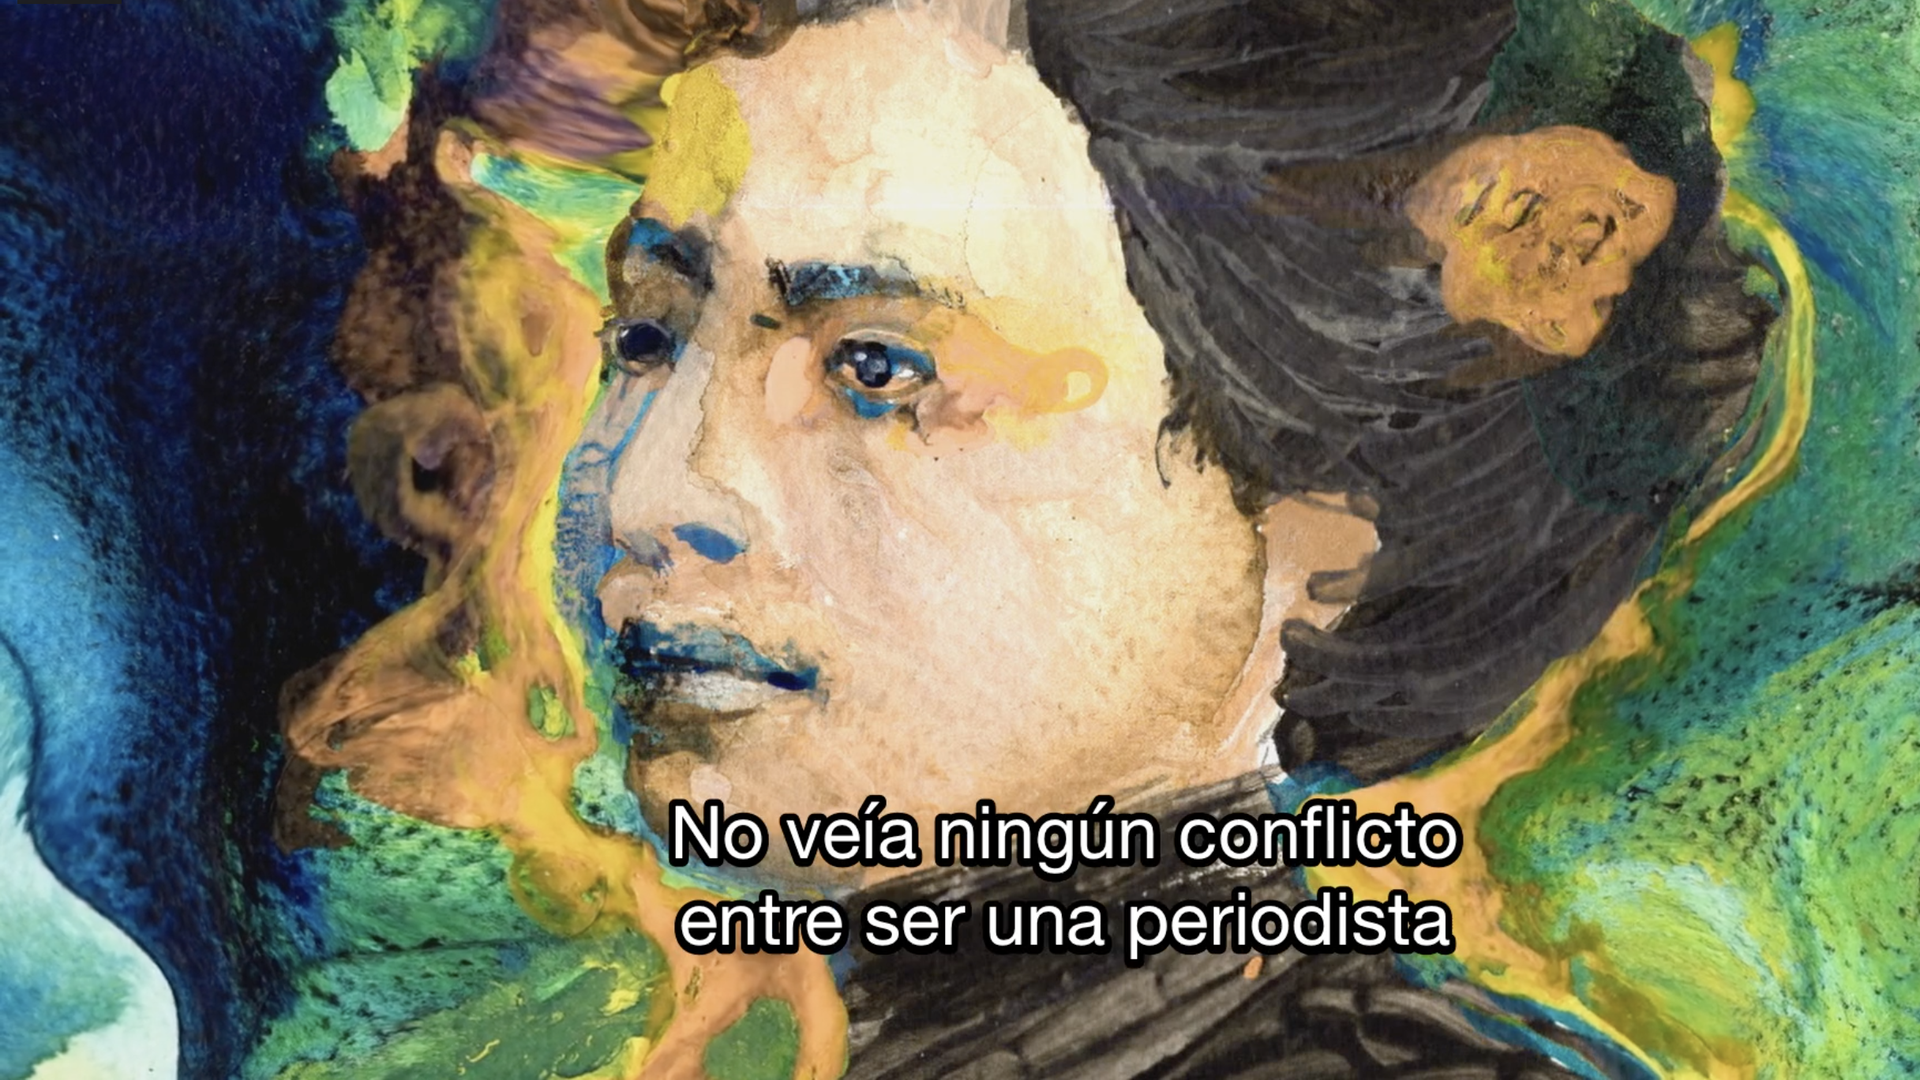 An artistic image of Mexican American journalist Jovita Idar from the PBS Unladylike series is shown with Spanish subtitles.